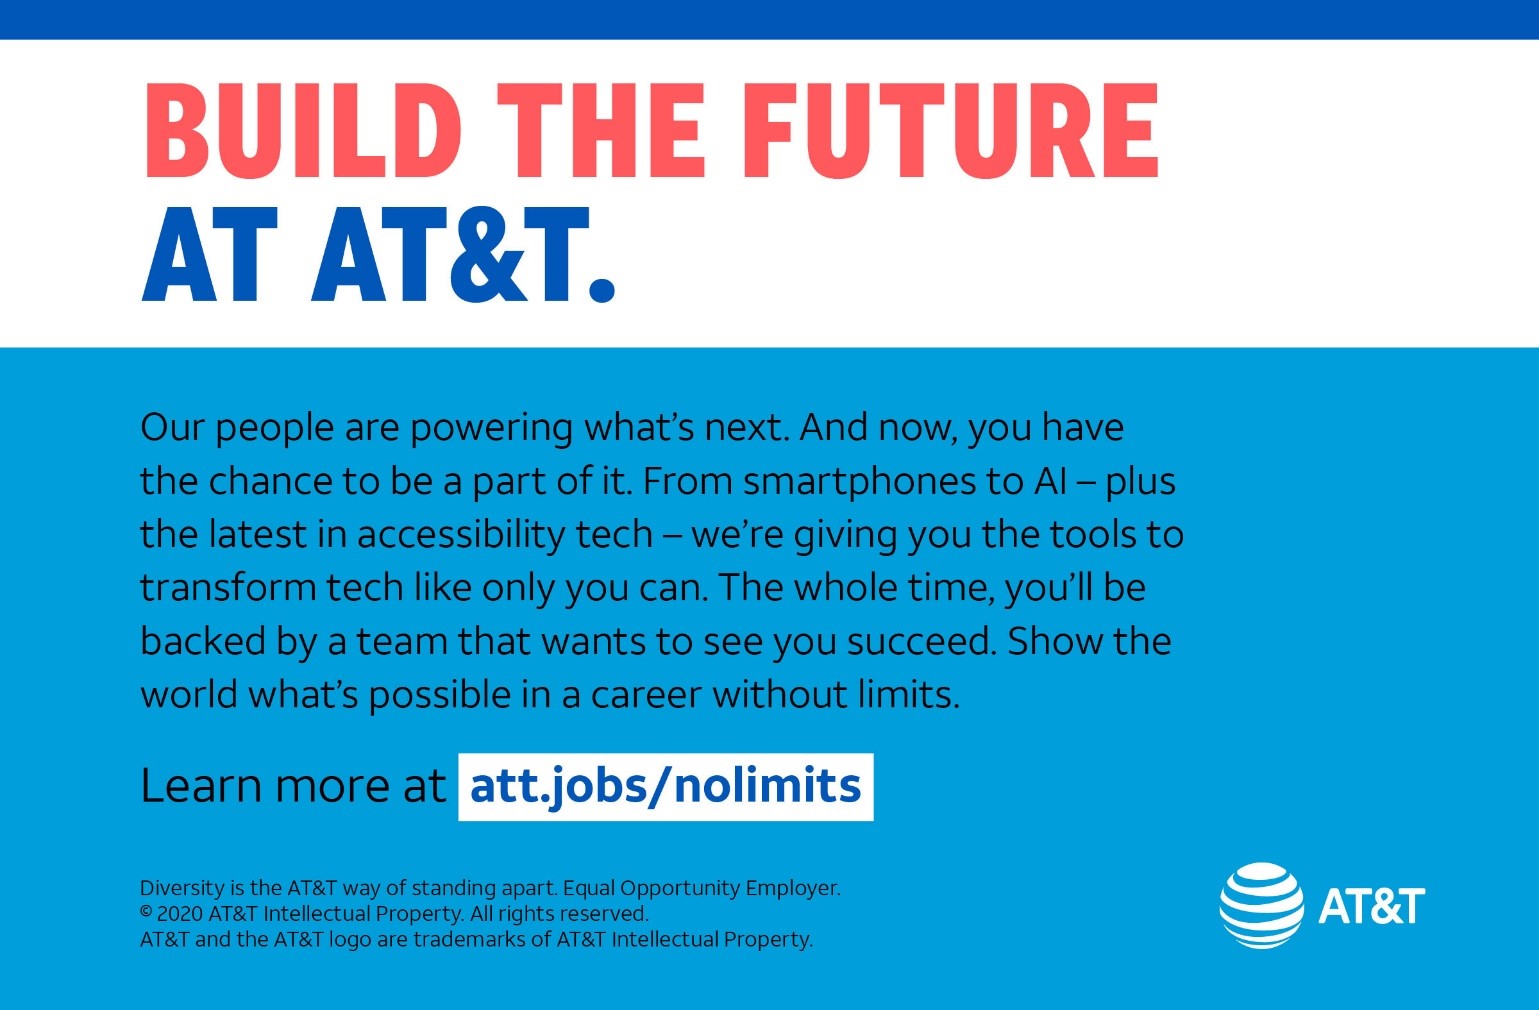 AT&T Our people are powering what’s next. And now, you have the chance to be a part of it. From smartphones to AI—plus the latest in accessibility tech—we’re giving you the tools to transform tech like only you can. The whole time, you’ll be backed by a team that wants to see you succeed. Show the world what’s possible in a career without limits. Learn more at att.jobs/nolimits. 